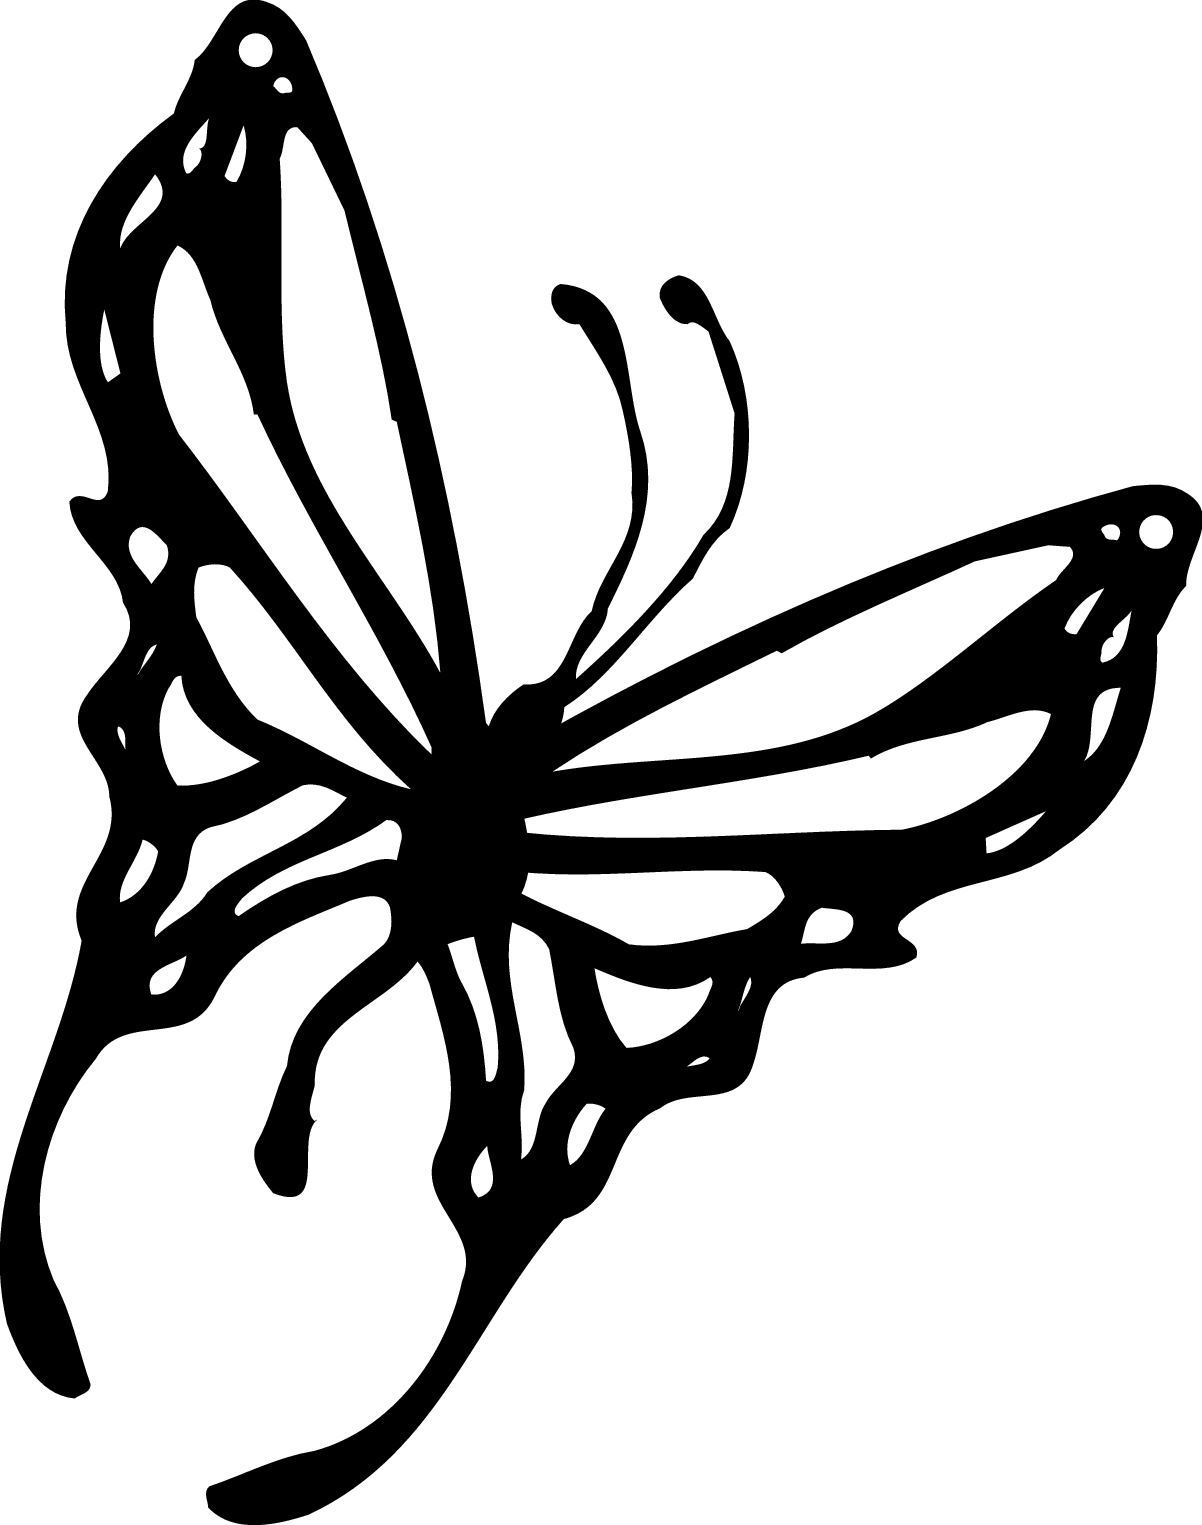 The Black Butterfly - ClipArt Best